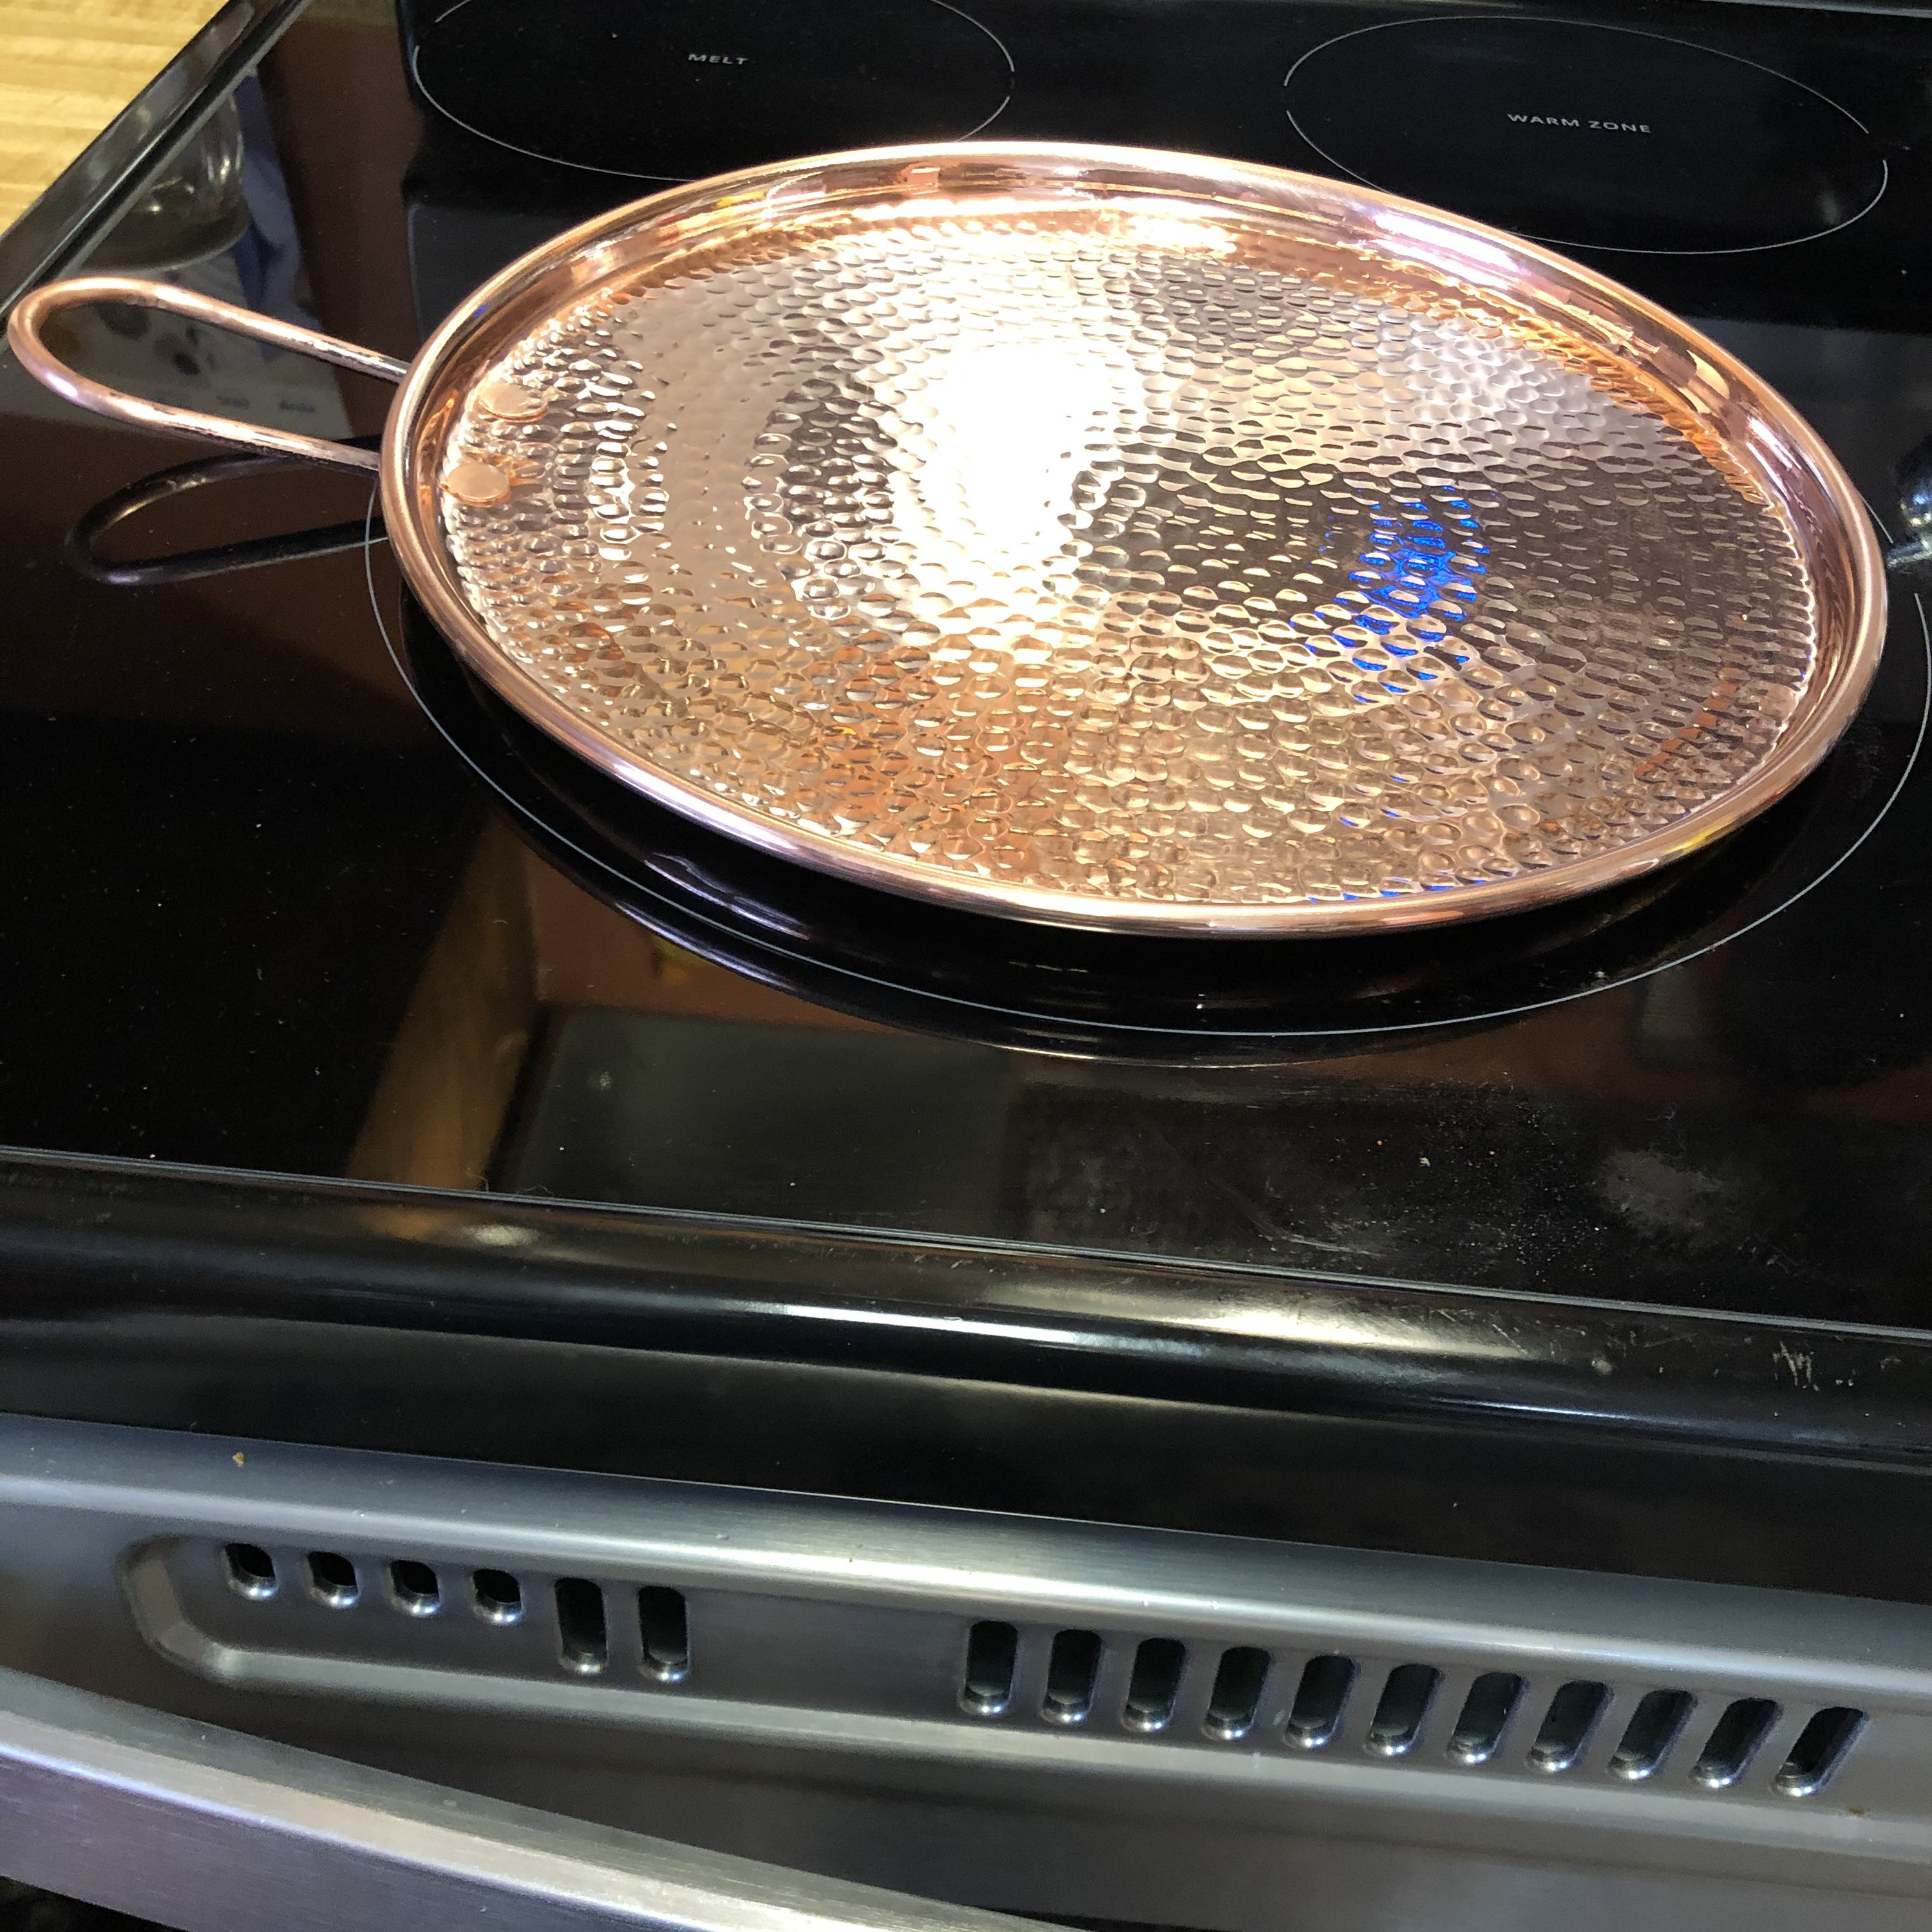 Handcrafted Hammered Copper 10” Round Comal Griddle Pan / Flat Grill